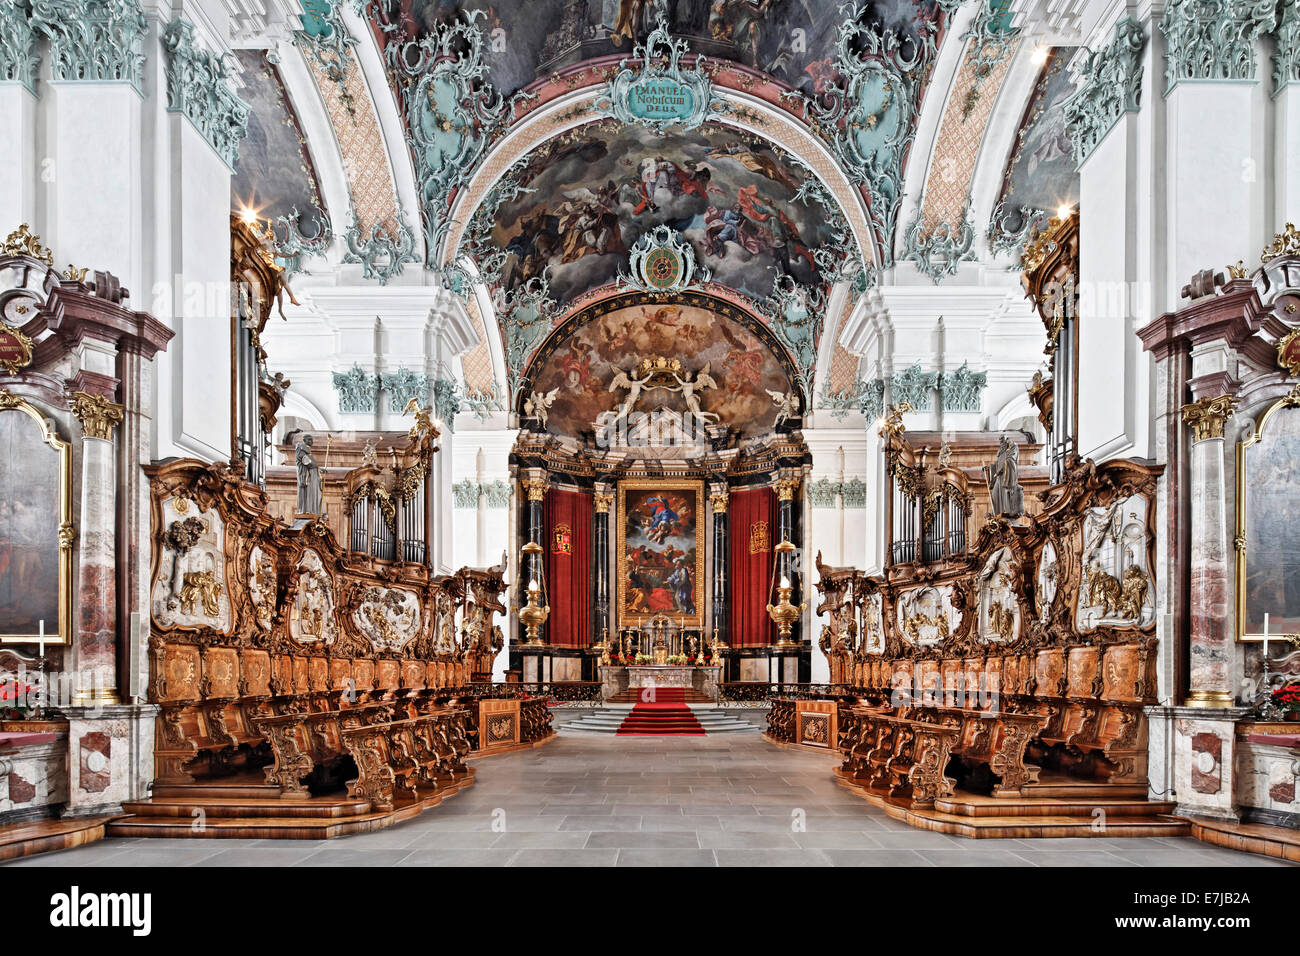 Choir, choir stalls and interior of the baroque Catholic Cathedral of St. Gallen, St. Gallen, Canton of St. Gallen, Switzerland Stock Photo